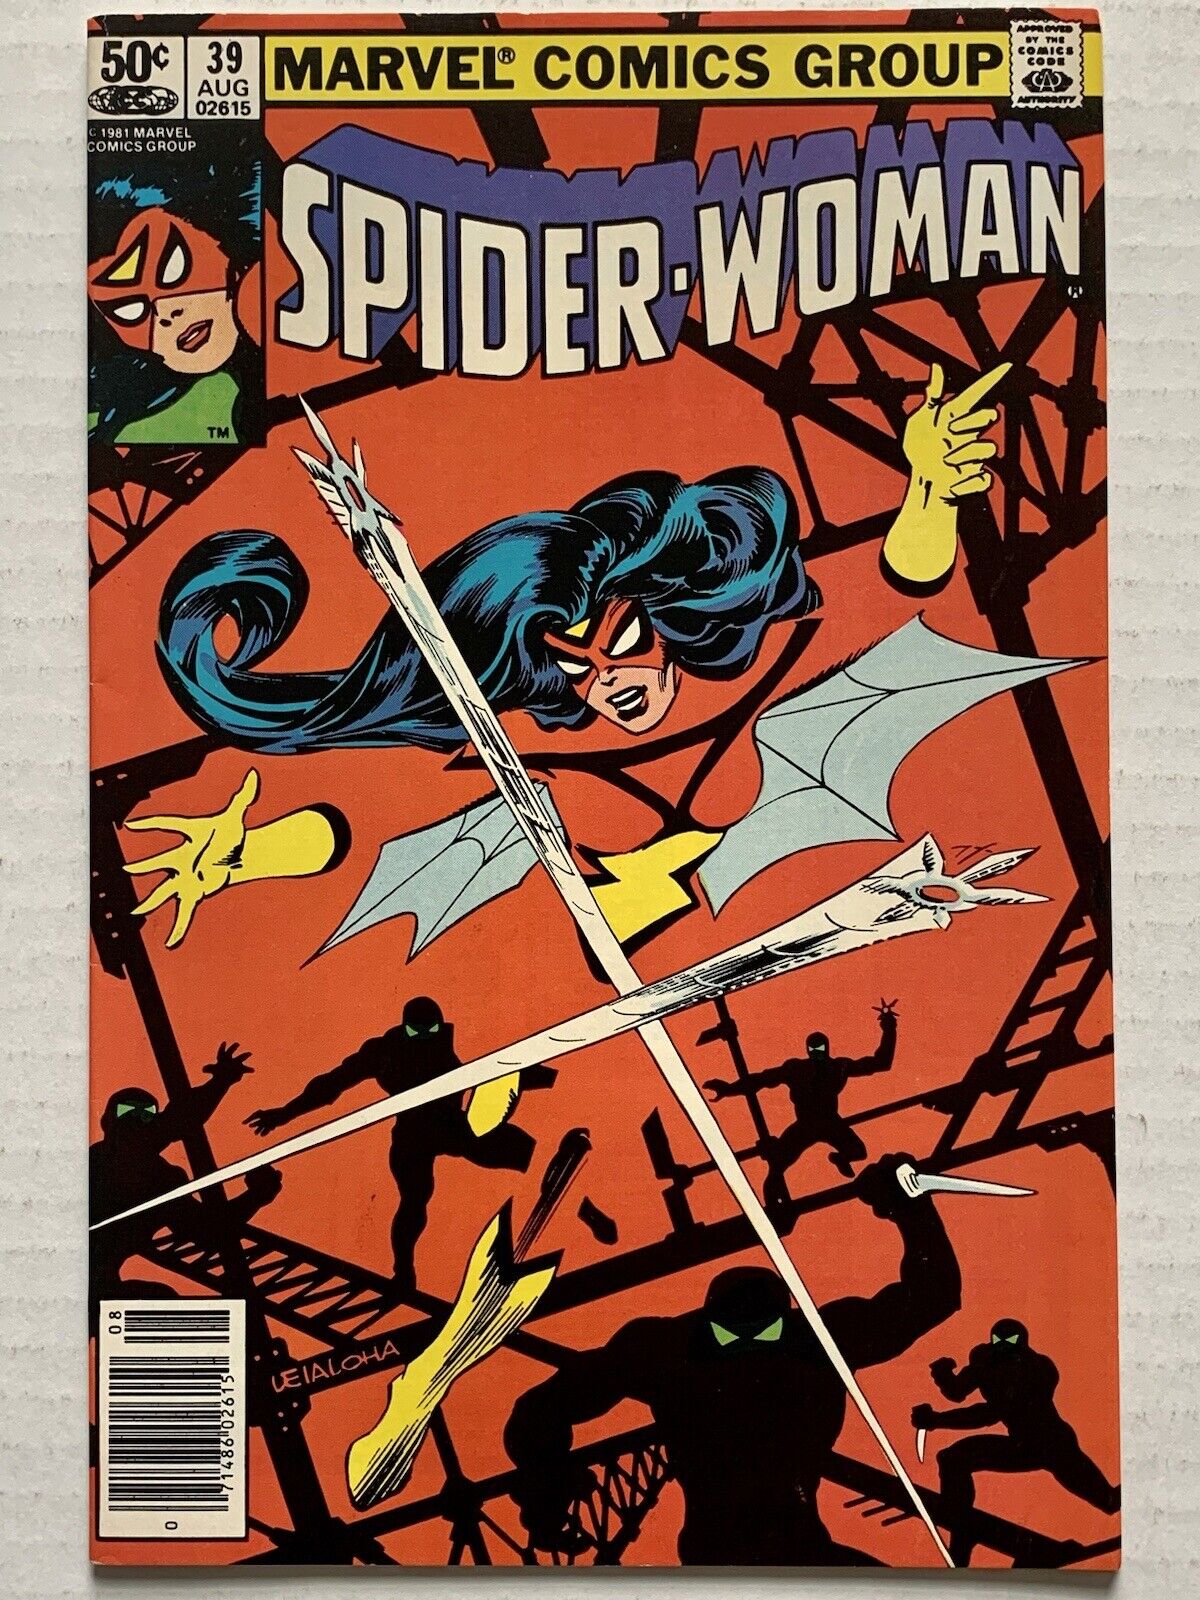 Spider-Woman #39 (1981) Negative Space Cover by Steve Leialoha (VF-/8.0)-VINTAGE